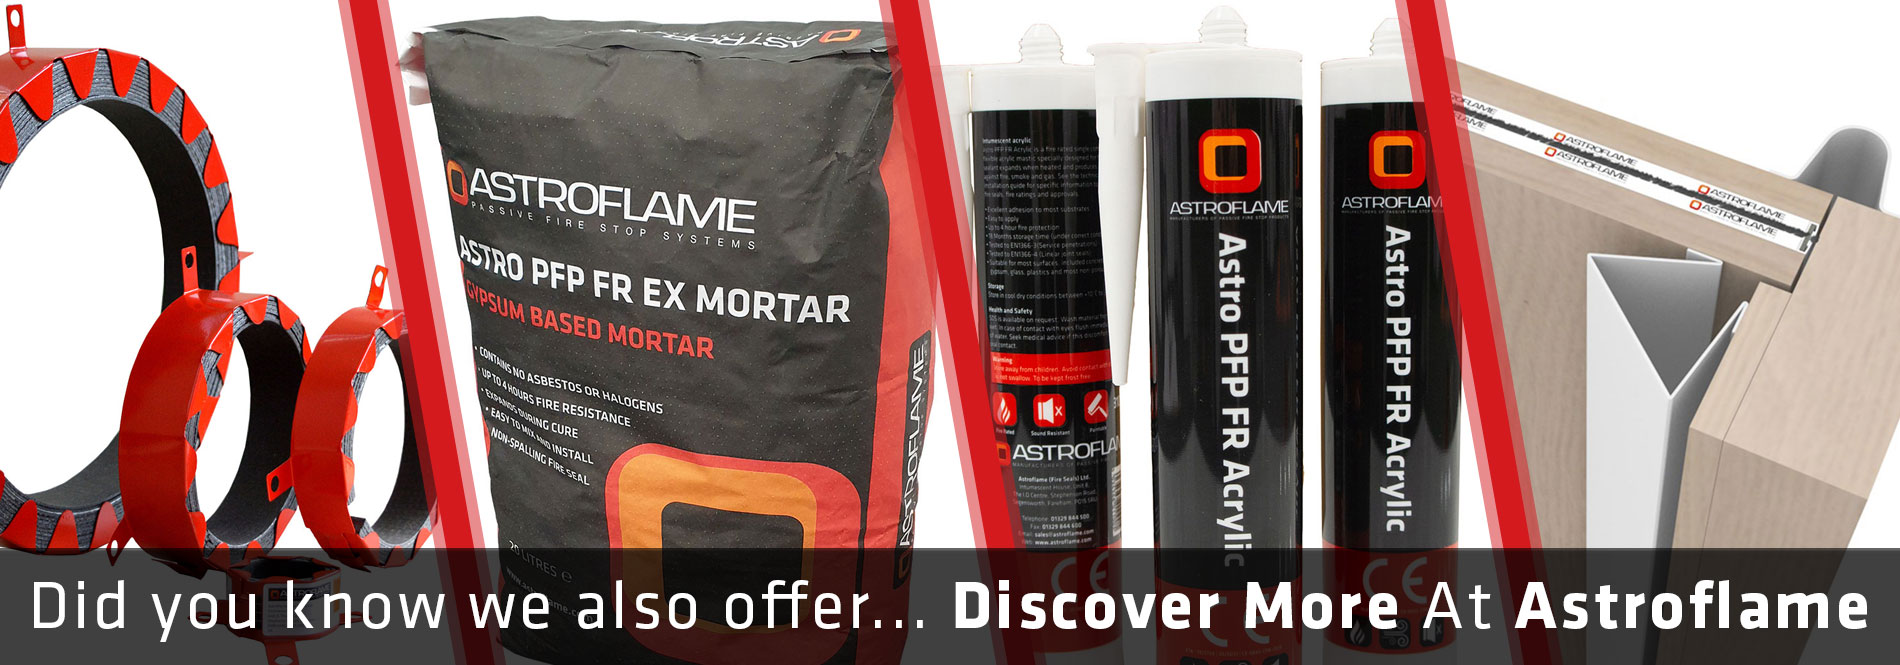 Did you know we also offer... Discover More At Astroflame